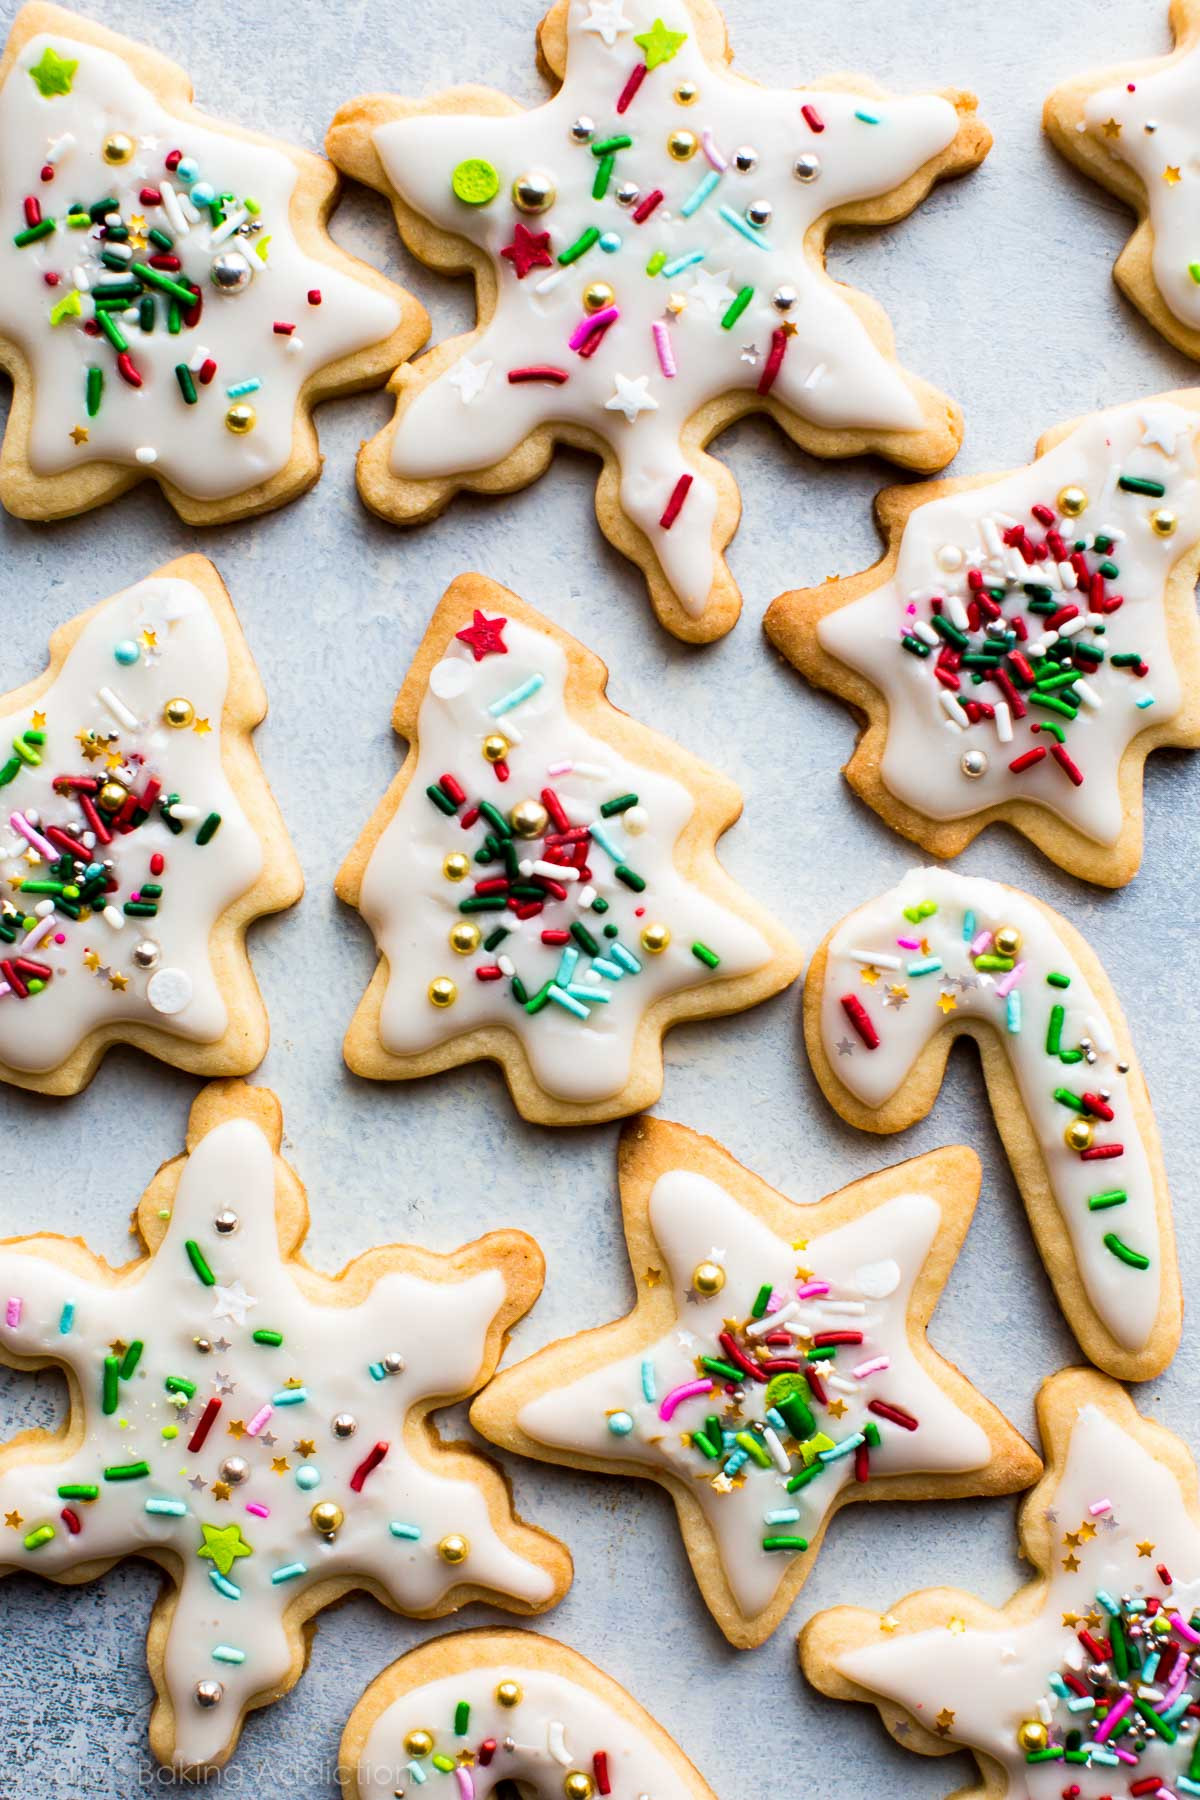 Homemade Sugar Cookies Icing
 Holiday Cut Out Sugar Cookies with Easy Icing Sallys